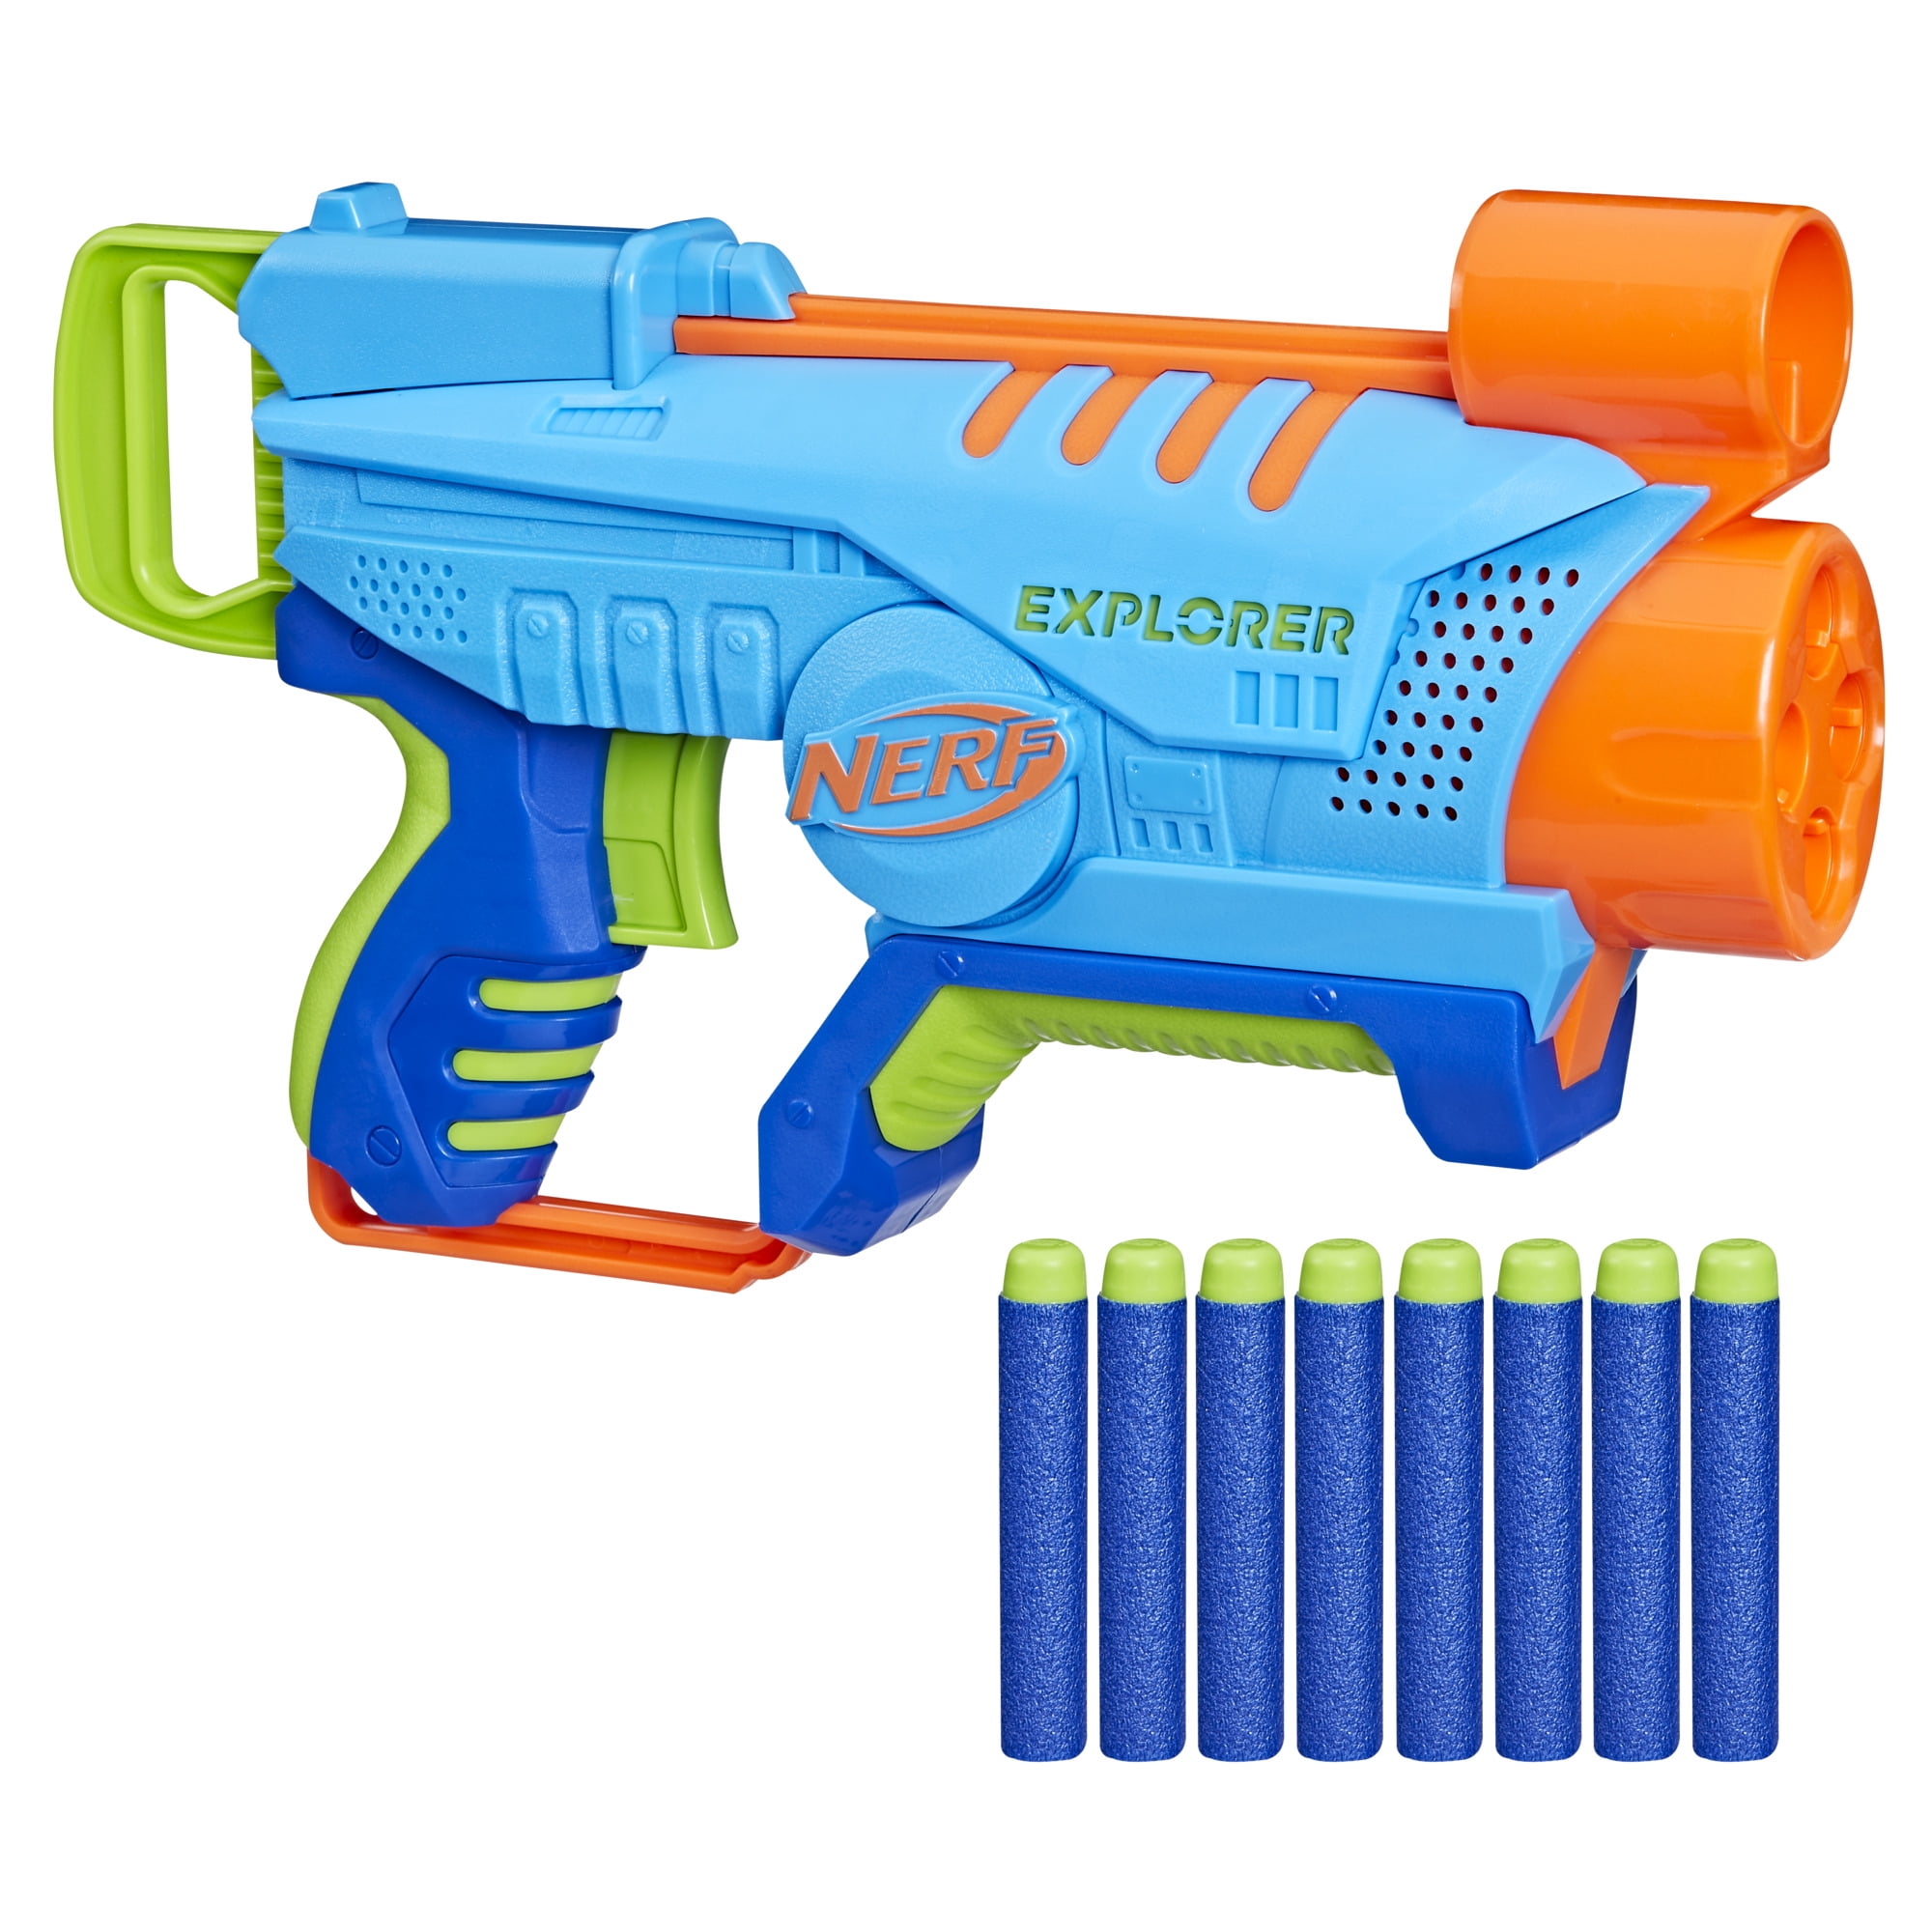 Nerf Alien Menace Digital Target used with box and book tested and working